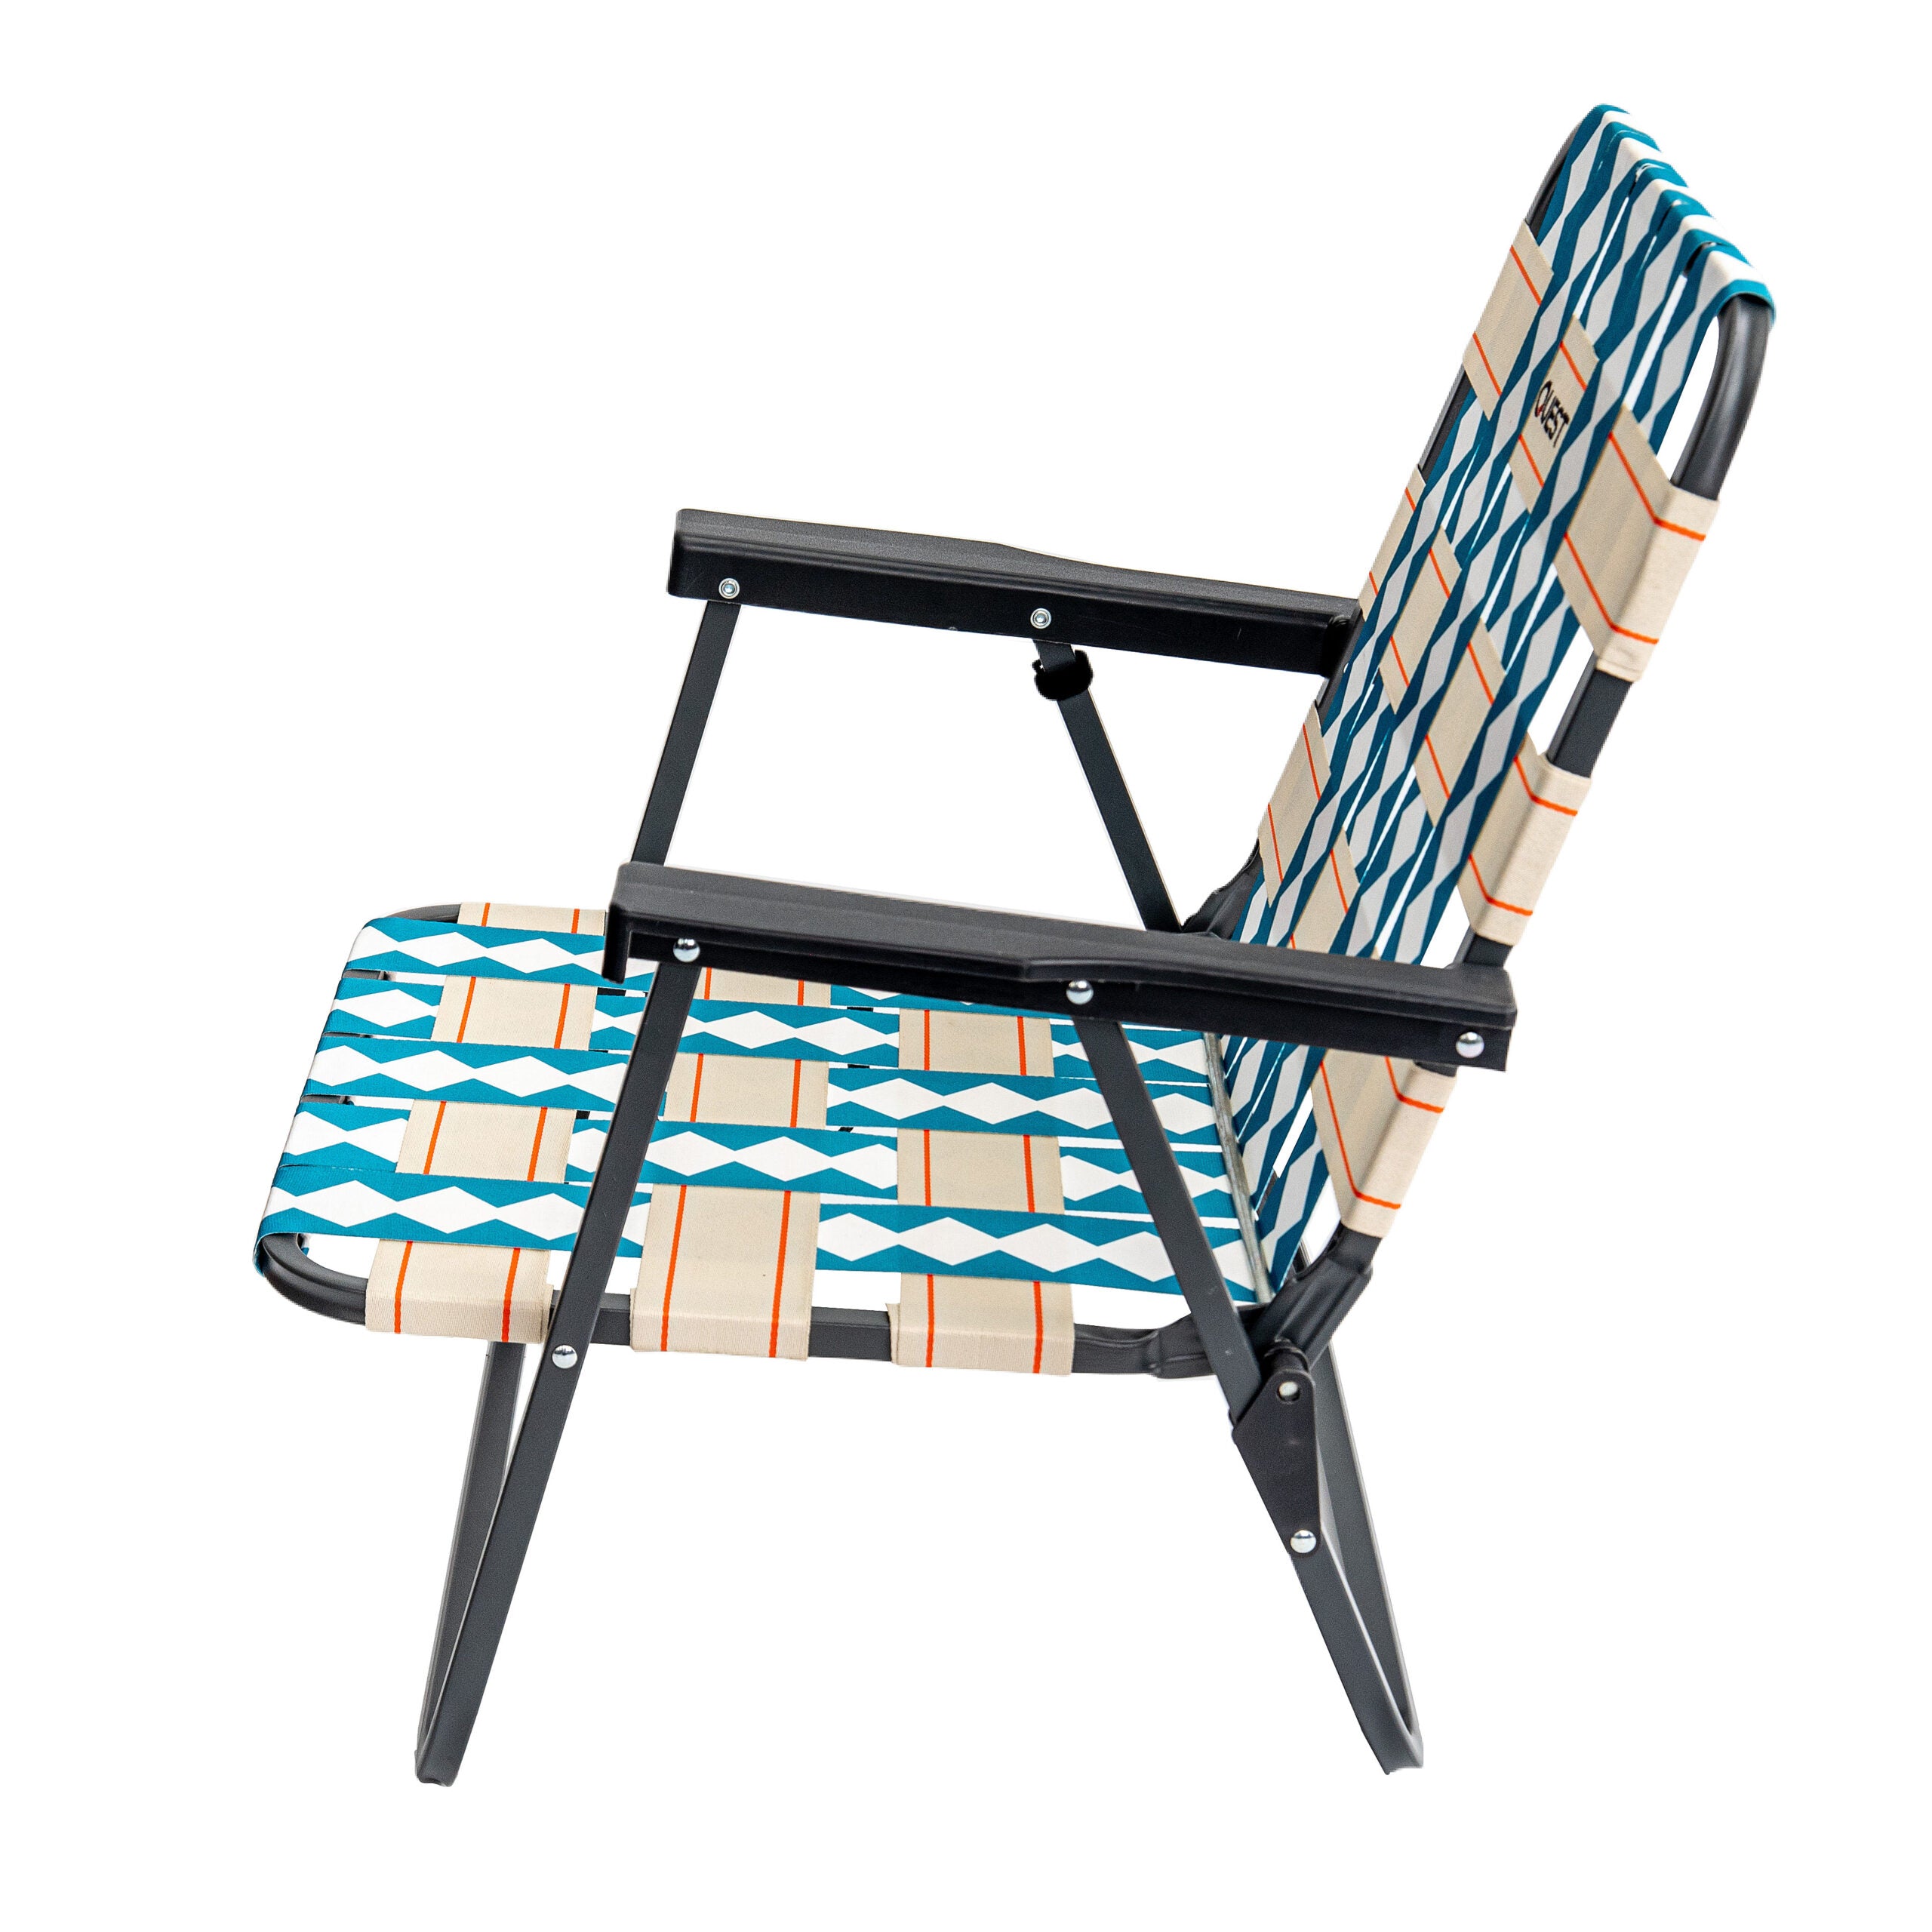 Quest Outdoors Cocomo Chair - Low